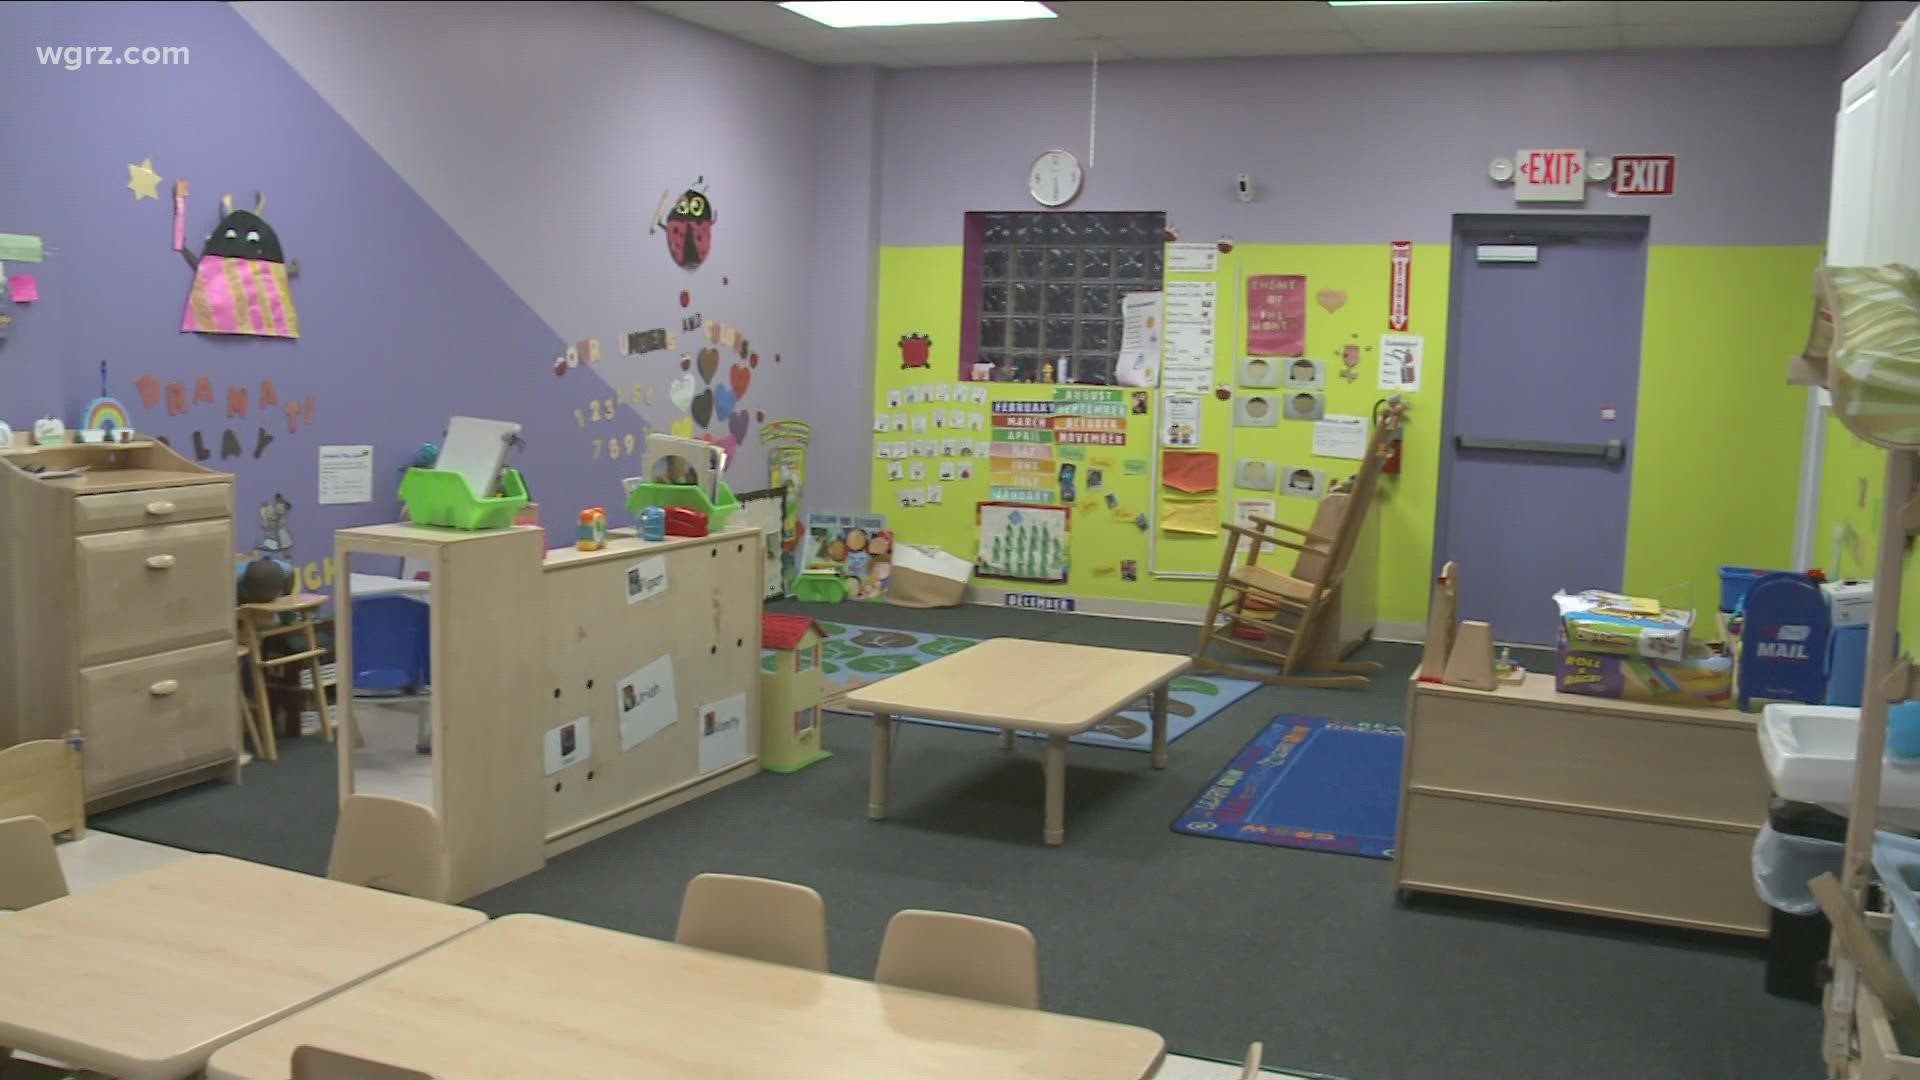 Local day care centers have been having a hard time staying afloat these last couple of years due to the Covid-19 pandemic.